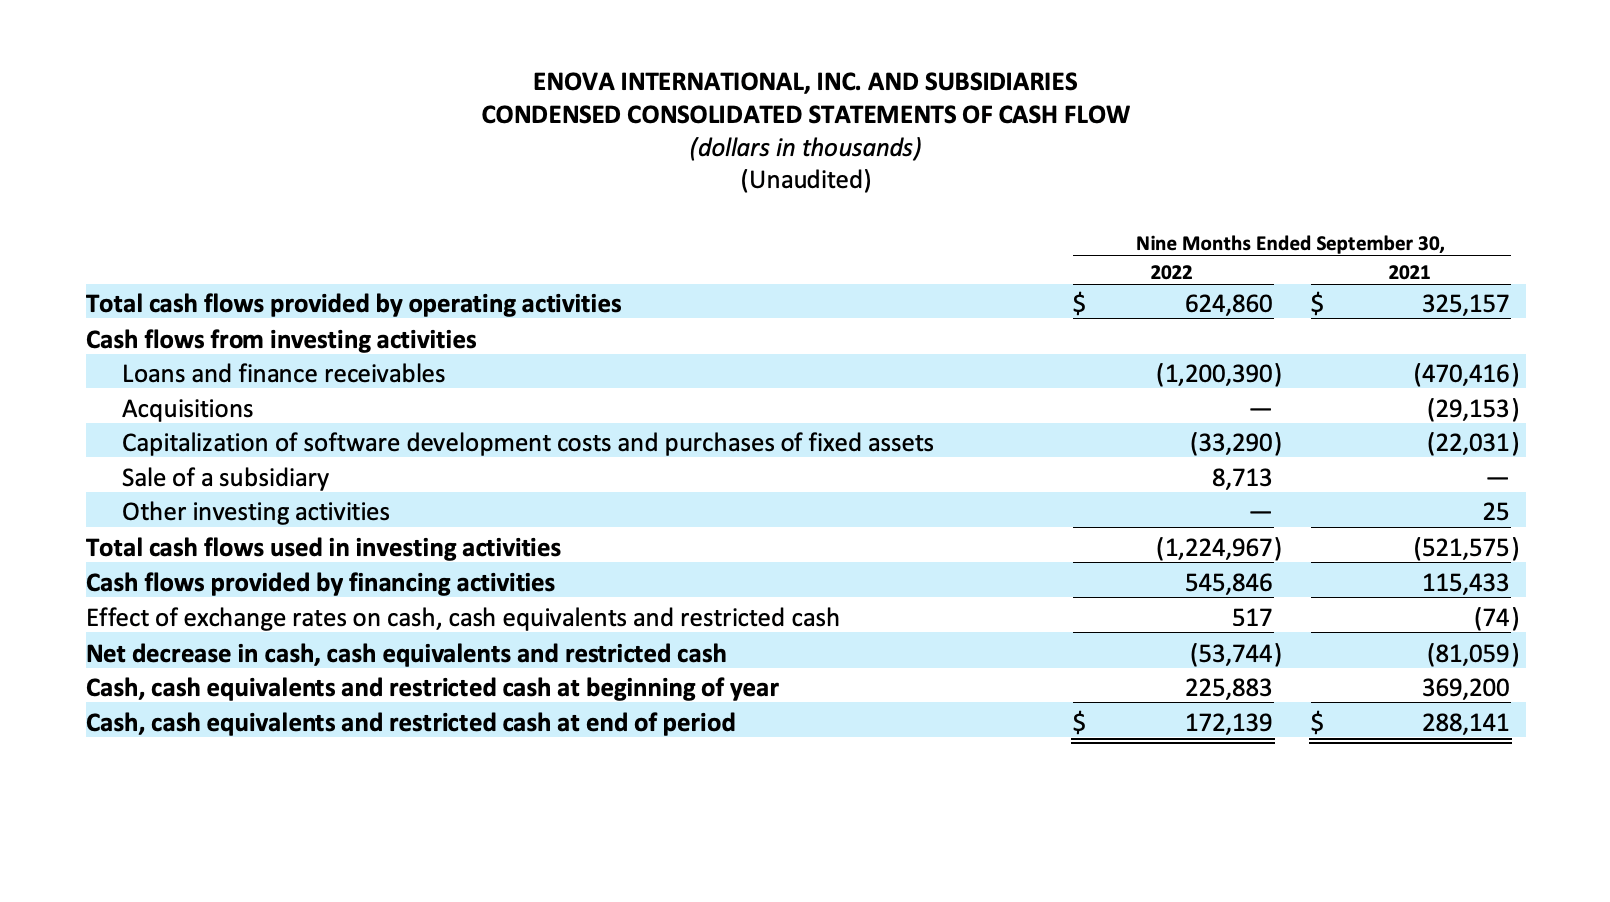 ENOVA INTERNATIONAL, INC. AND SUBSIDIARIES CONDENSED CONSOLIDATED STATEMENTS OF CASH FLOW 